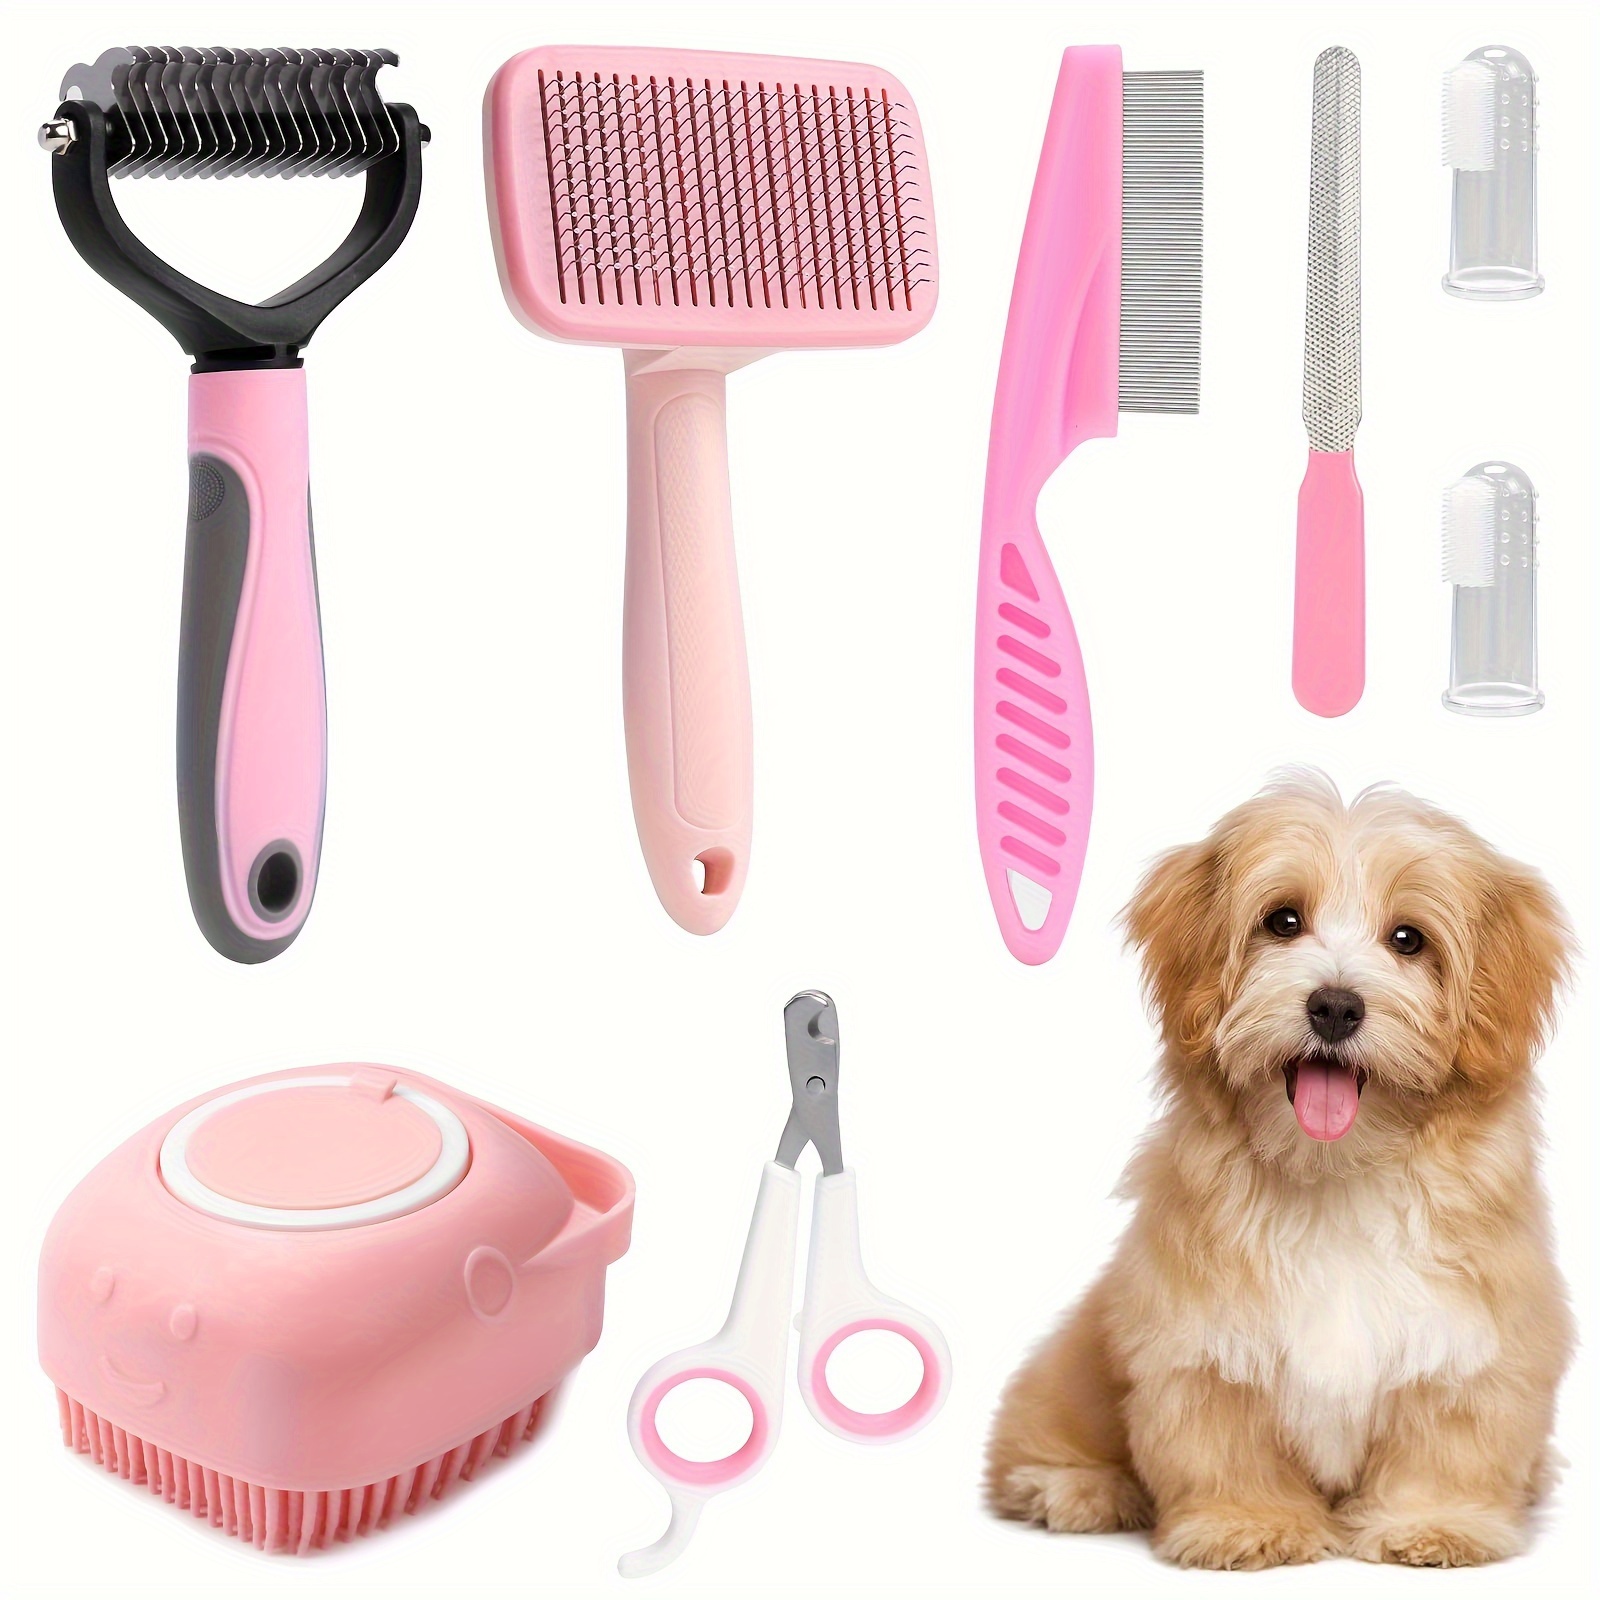 

8pcs Dog Brush Grooming Set, Pet Cleaning Set With Pet Nail Clipper And File, Flea Comb, Pet Shampoo Brush, Pet Hair Removal Brush And Silicone Toothbrush